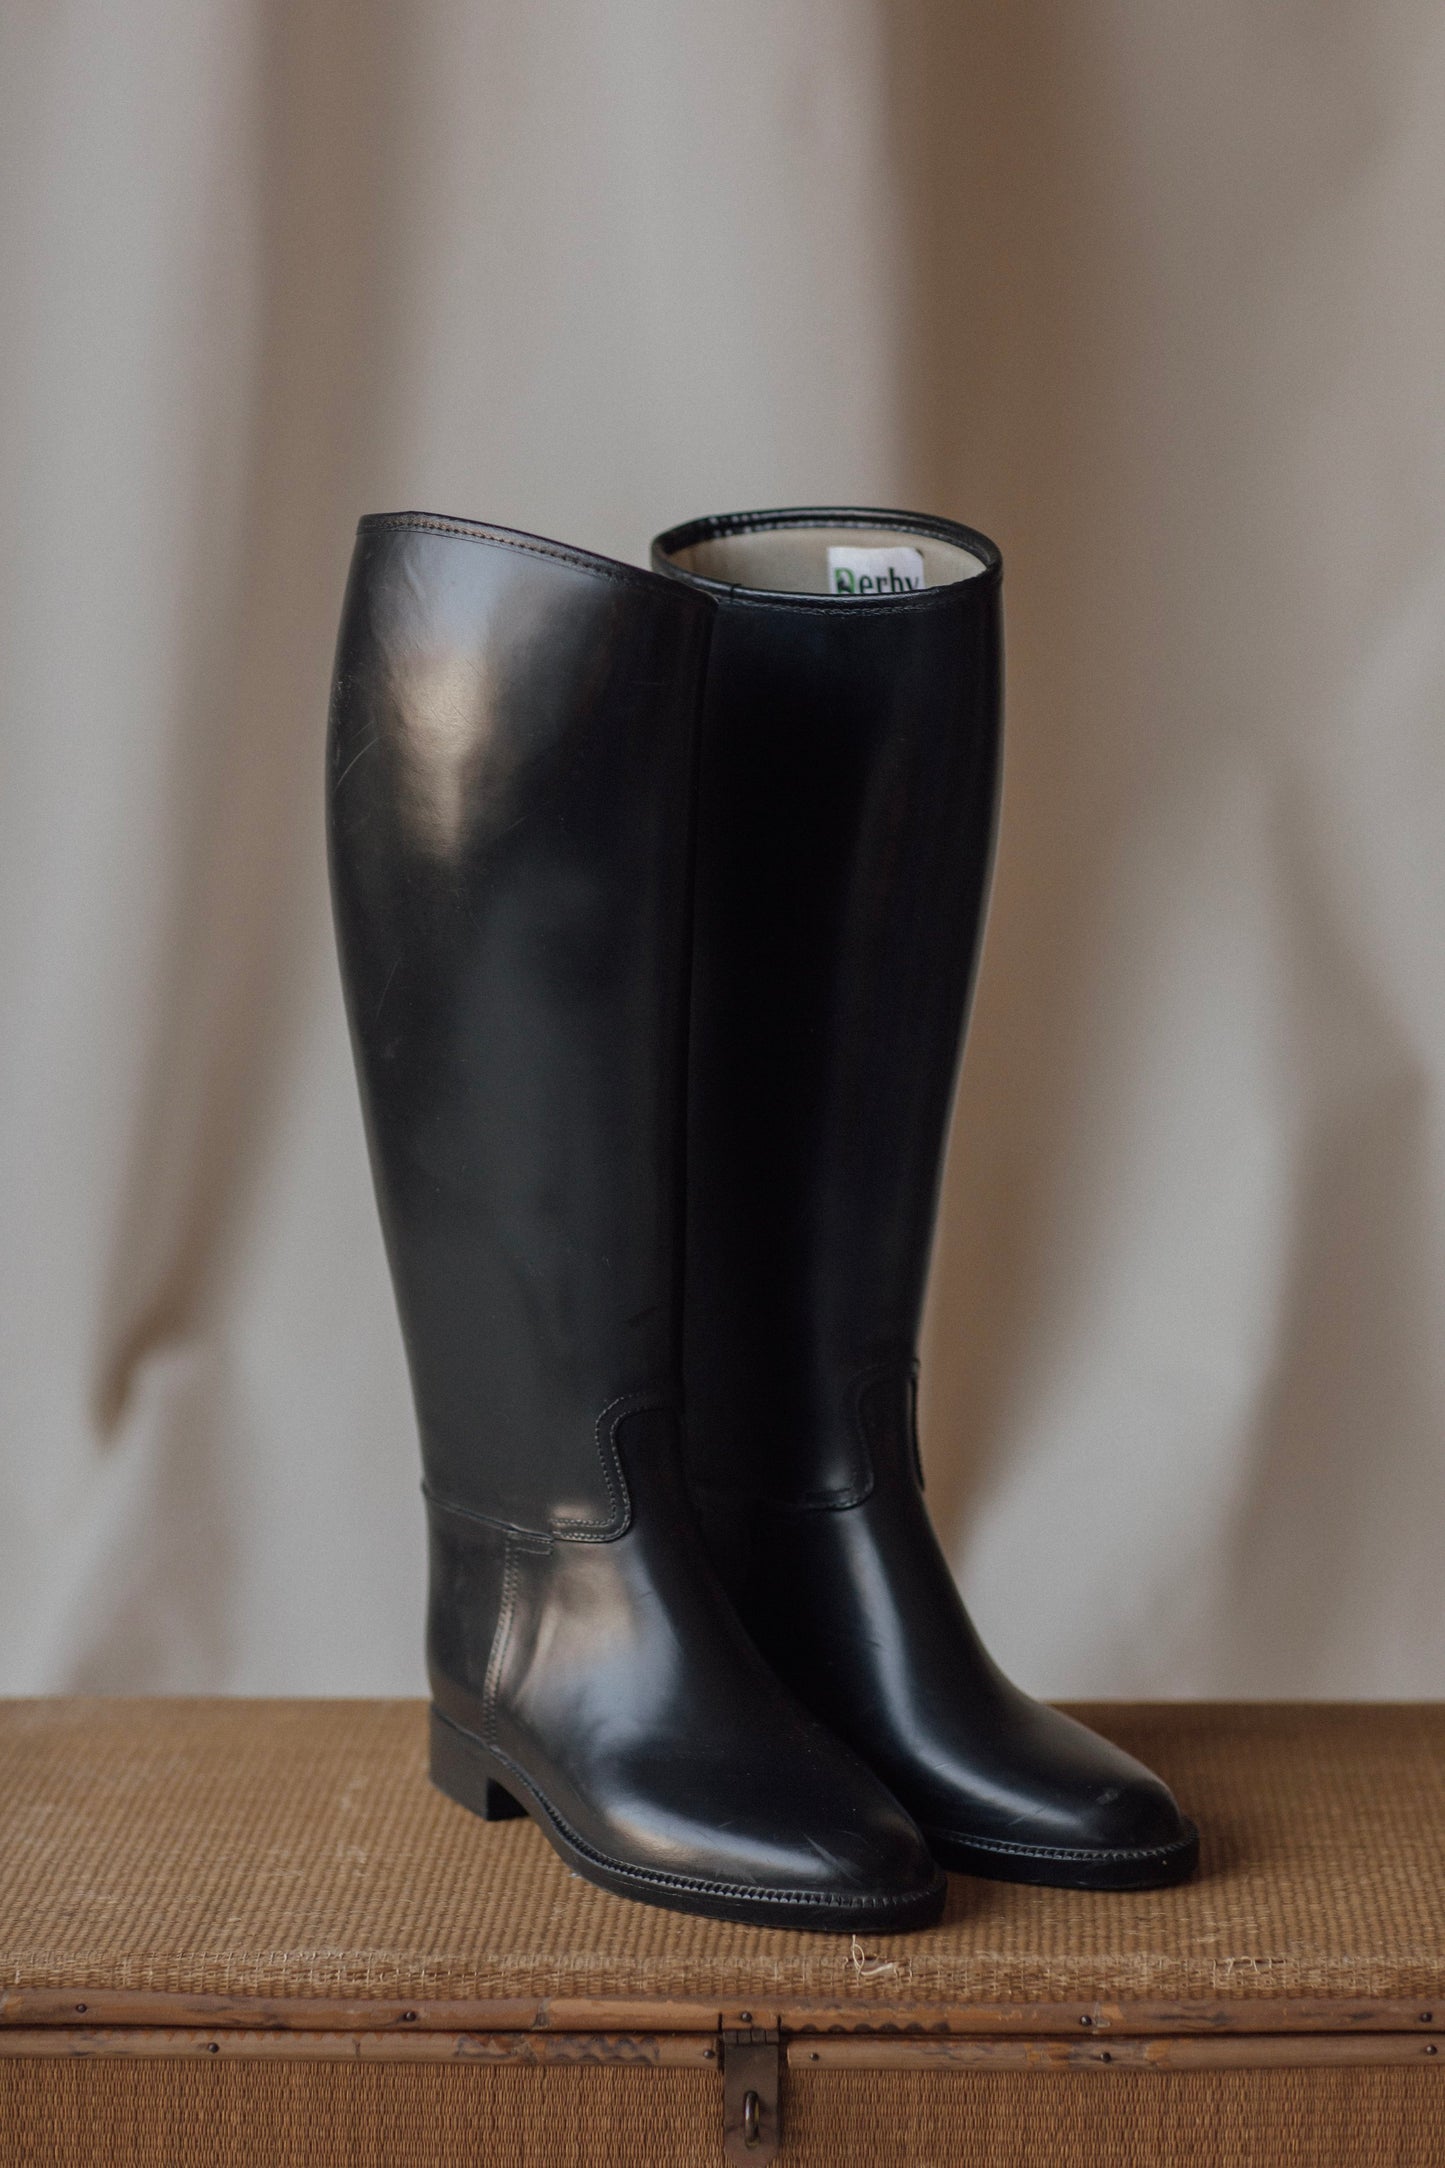 Cottage Craft Rubber Boots